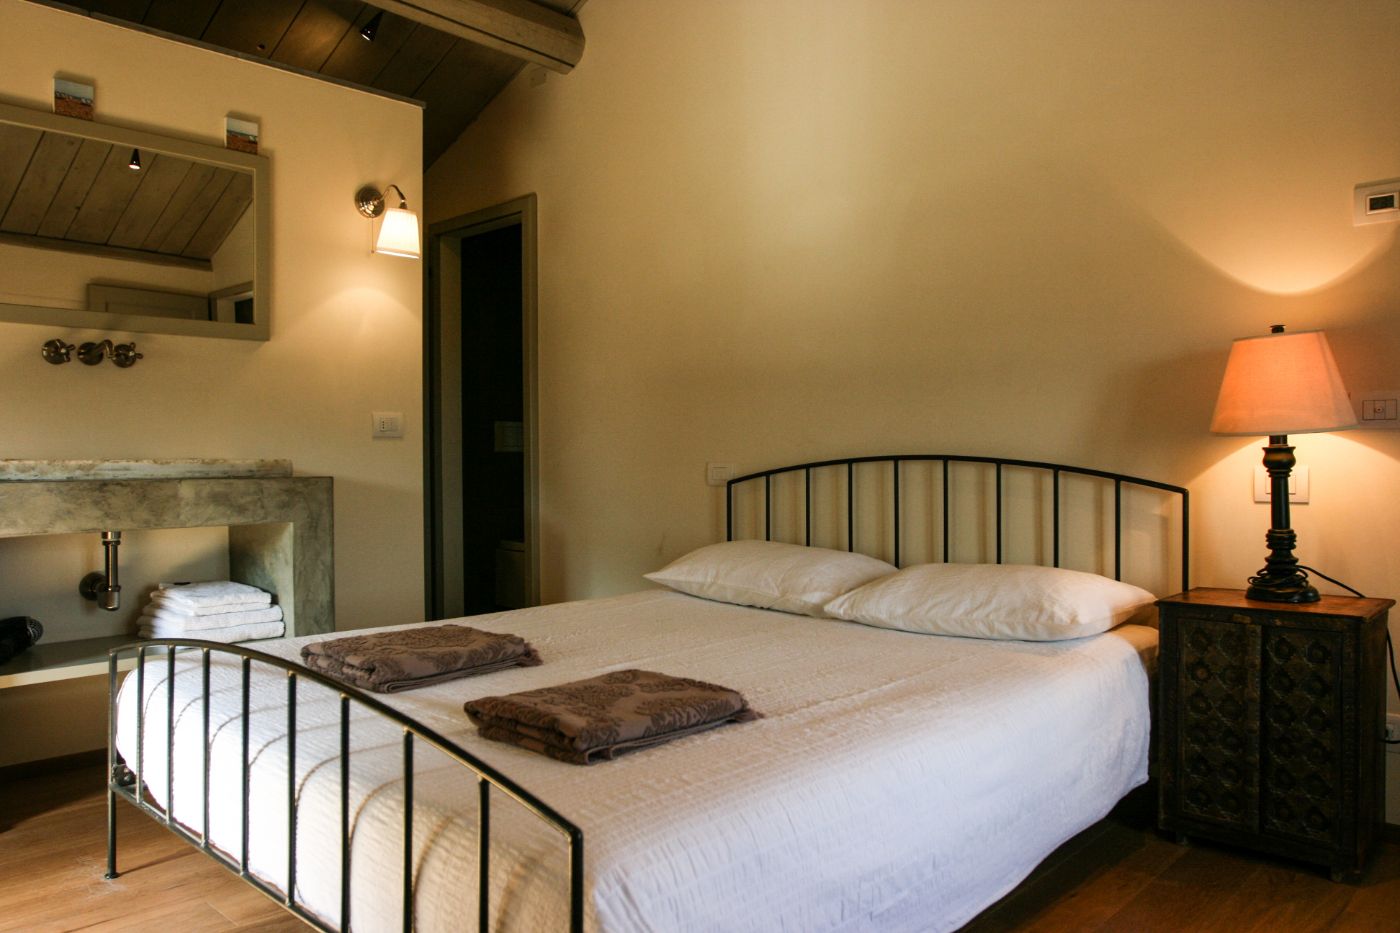 A King-sized bed in the second bedroom of La Spighetta.